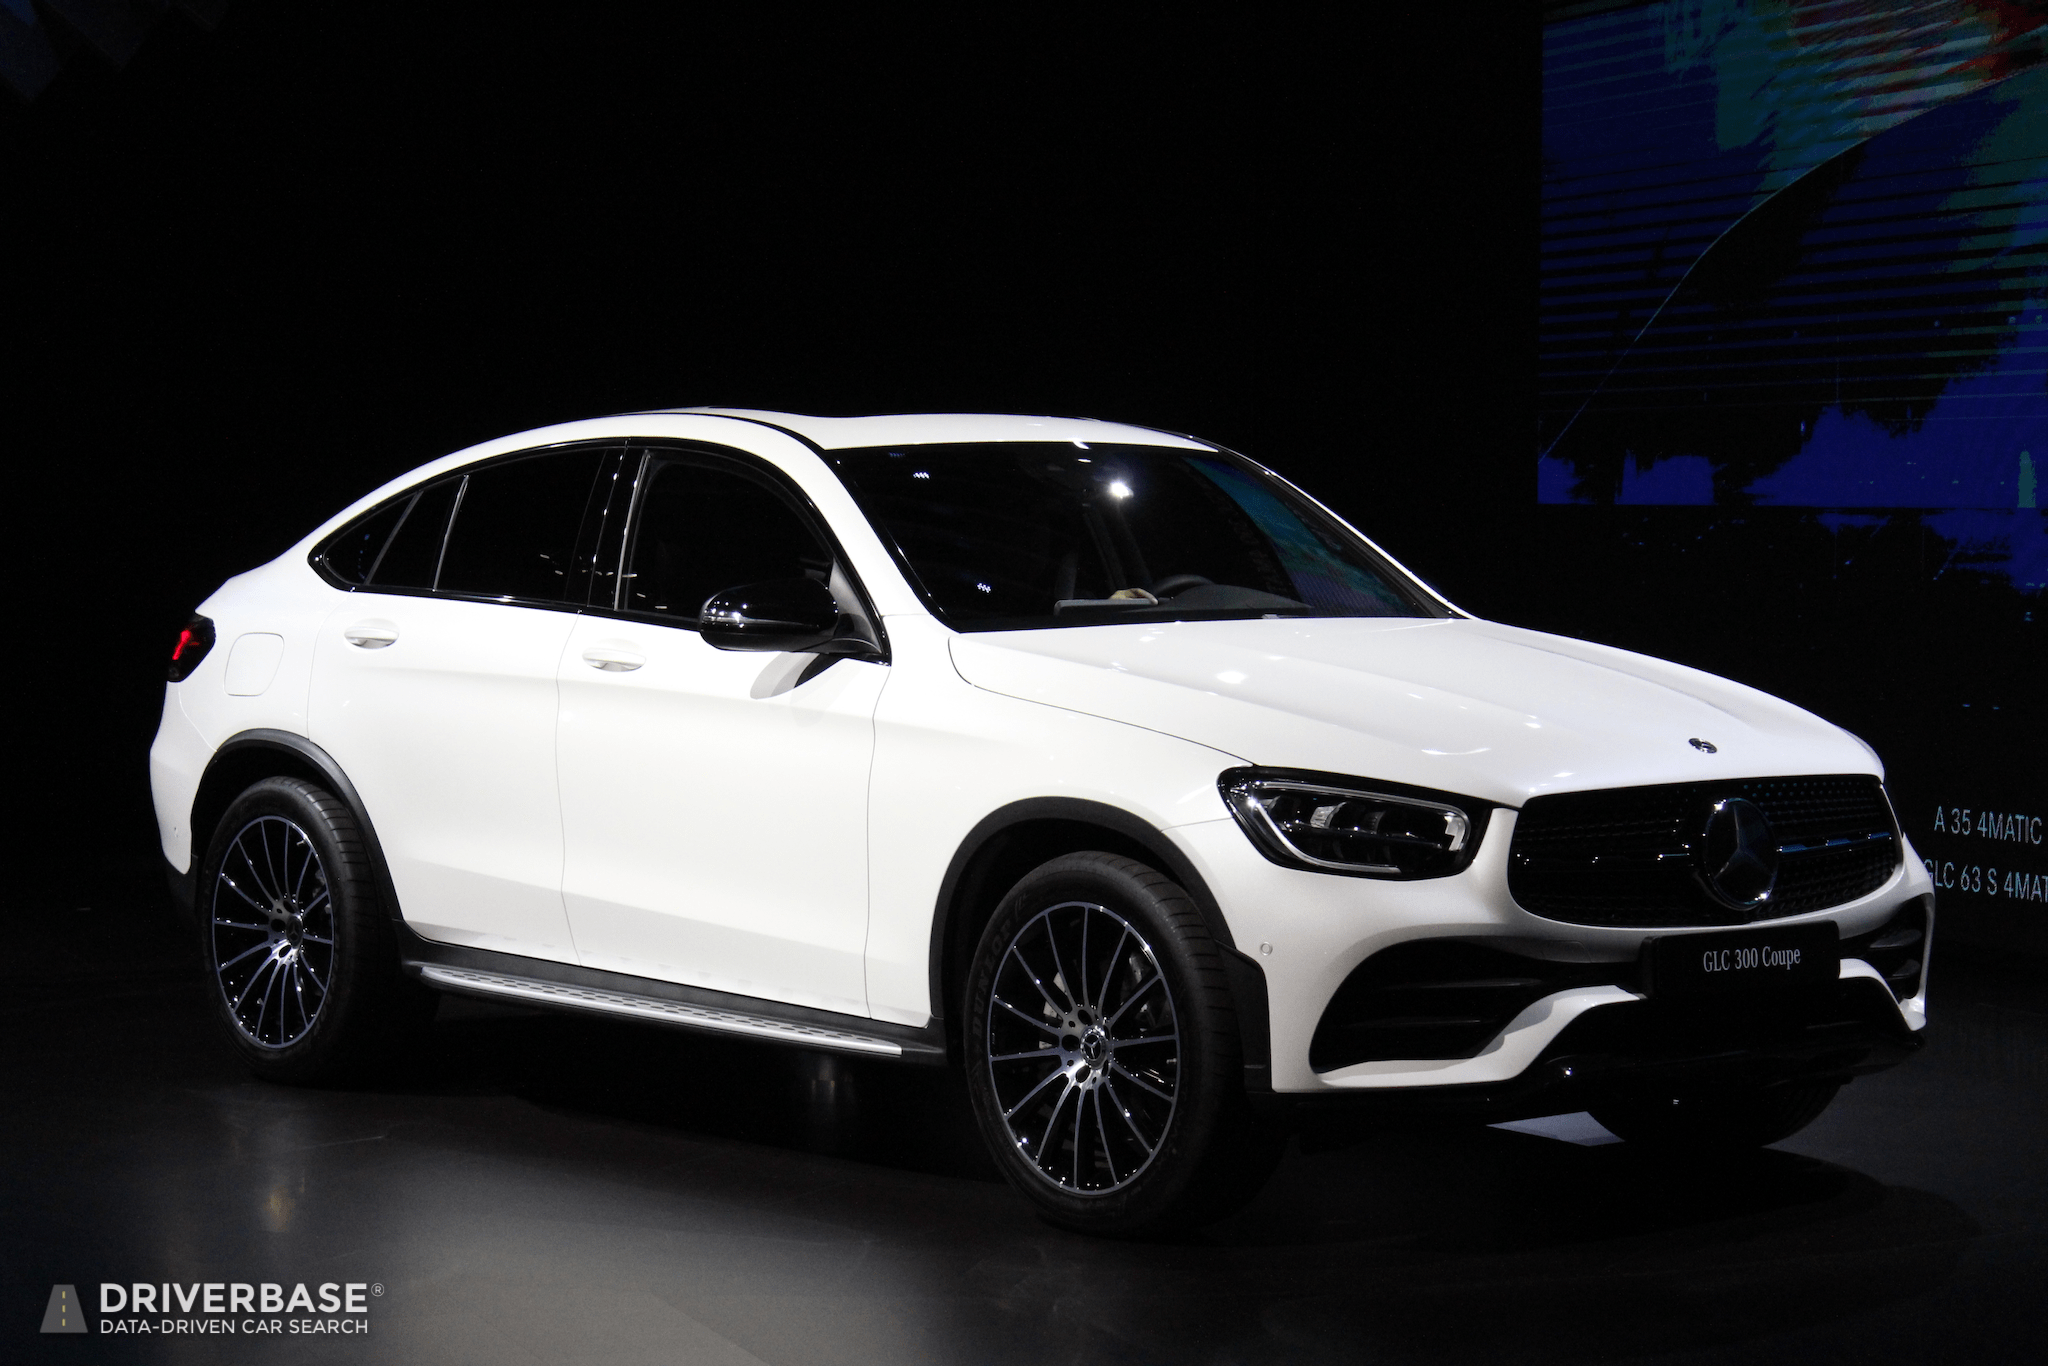 2020 Mercedes-Benz GLC 300 Coupe at the 2019 New York Auto Show ...